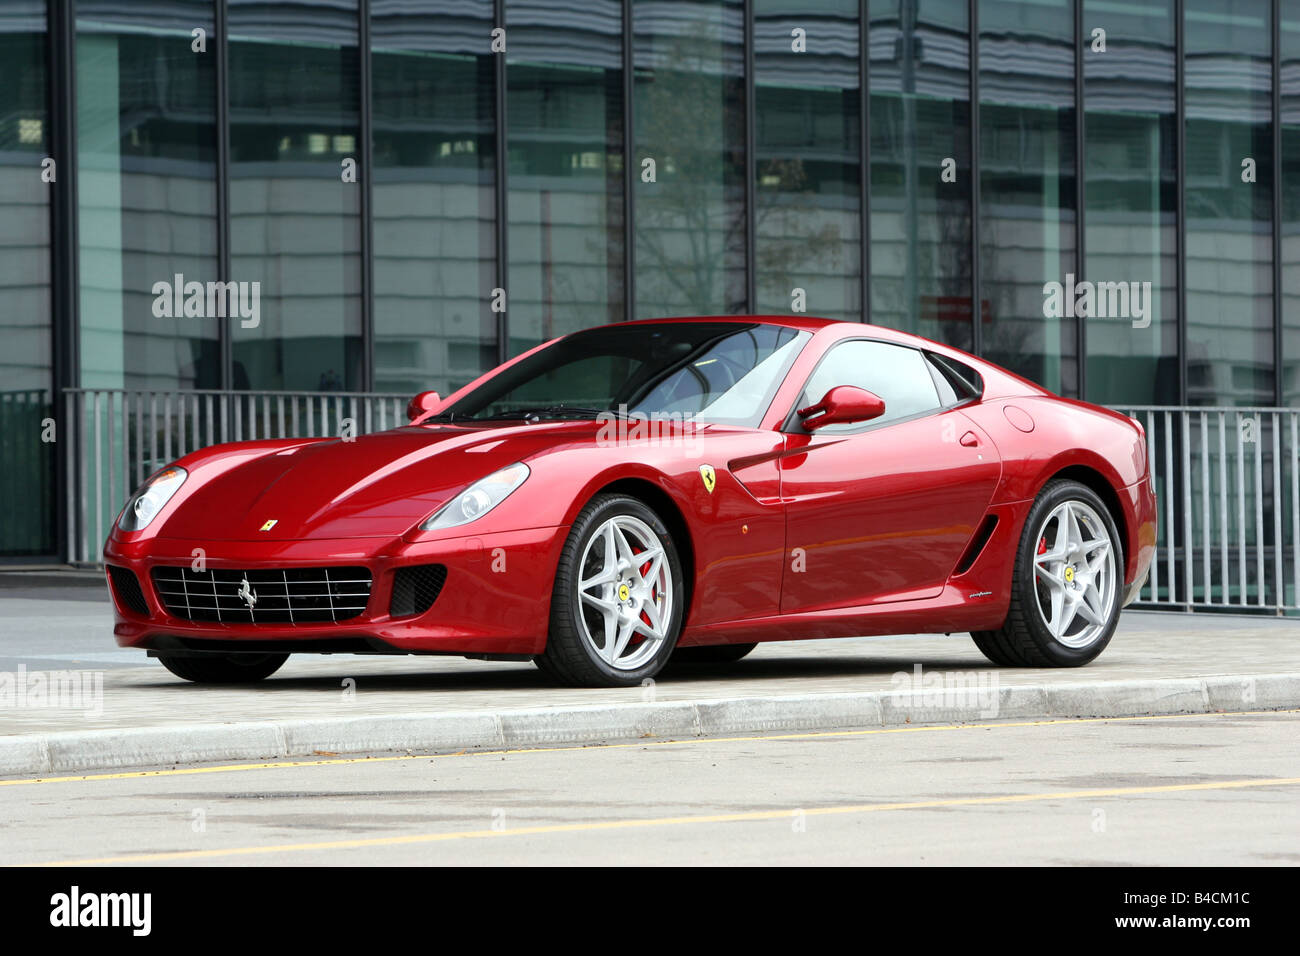 Ferrari 599 Gtb Fiorano Red Model Year 2006 Standing Upholding Diagonal From The Front Frontal View Side View City Stock Photo Alamy